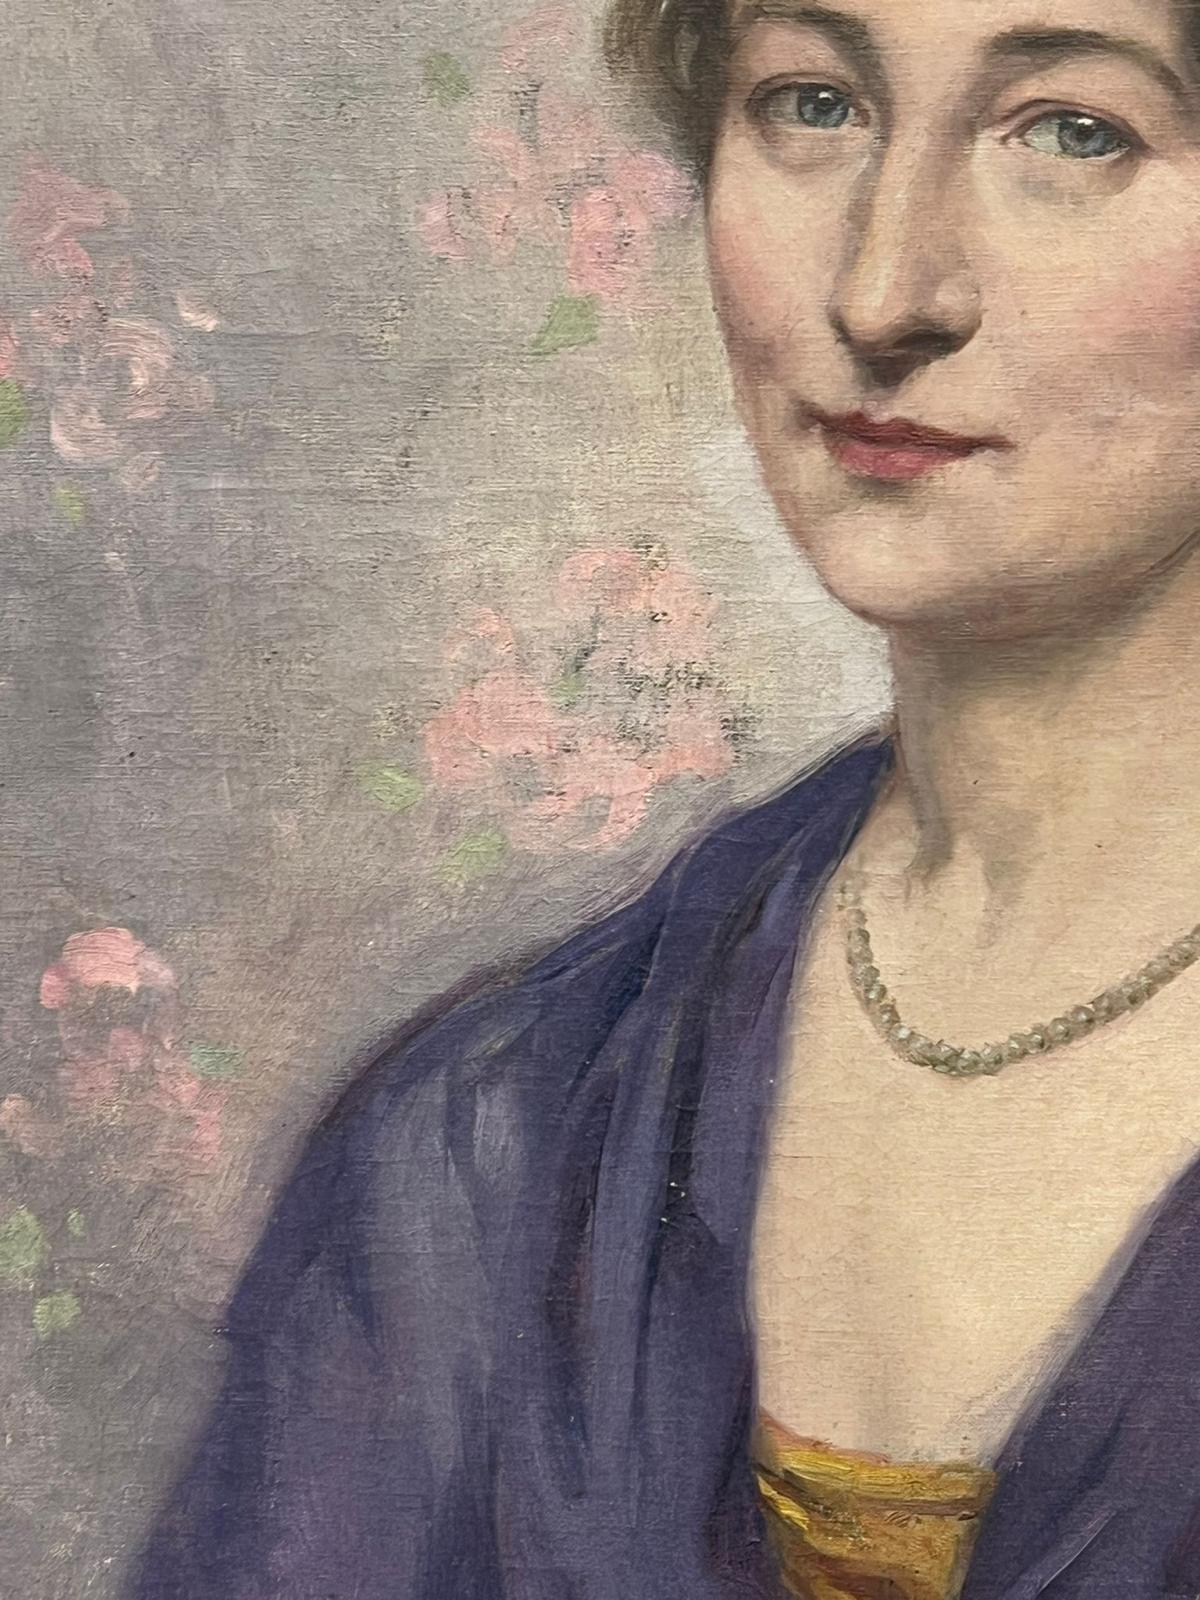 Portrait of a Lady in Purple Dress against a Pink and Blue Wallpaper background
French School, circa 1930's
signed lower front corner
oil on canvas, unframed
canvas: 22 x 18 inches
provenance: private collection, France
condition: very good and